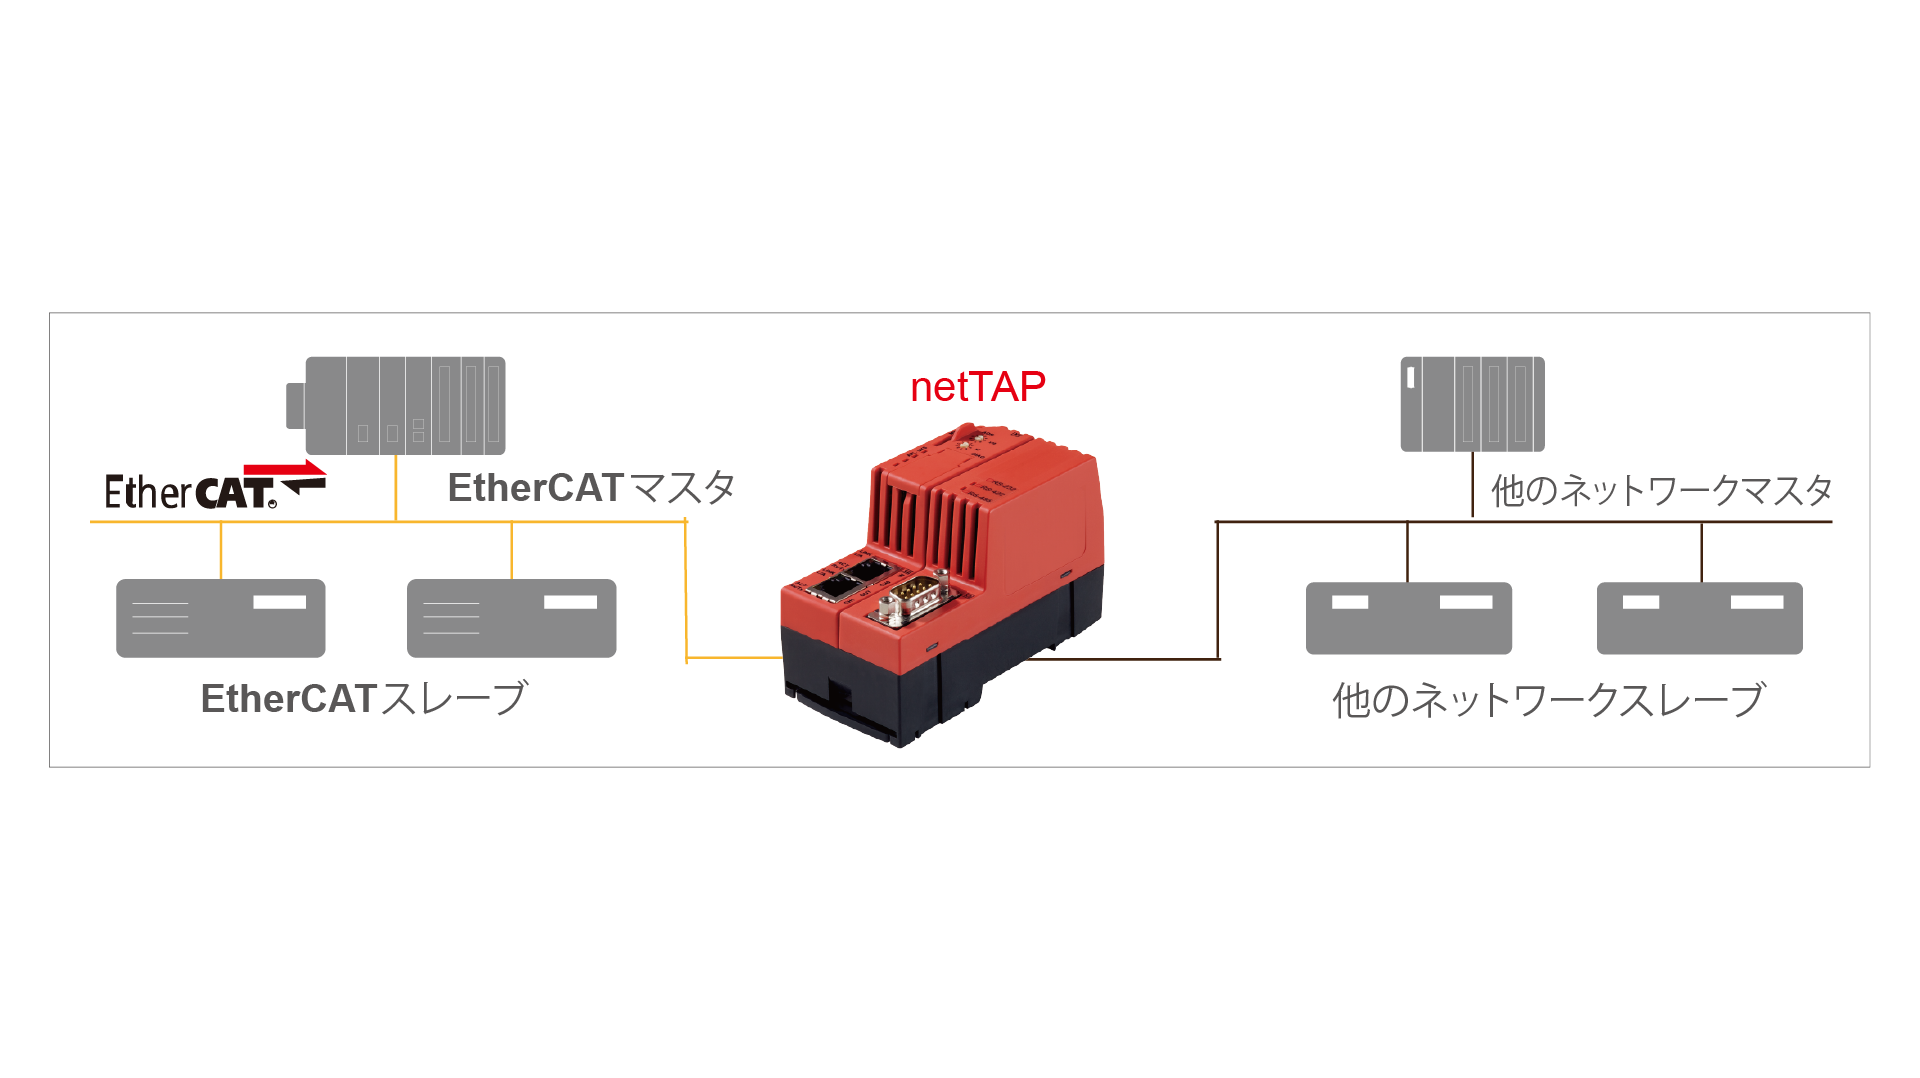 A graphic showing a yellow network line with three device icons and an EtherCAT logo on the left. On the right, there are also three device icons and a black network line. In the middle is a netTAP gateway between these two networks.